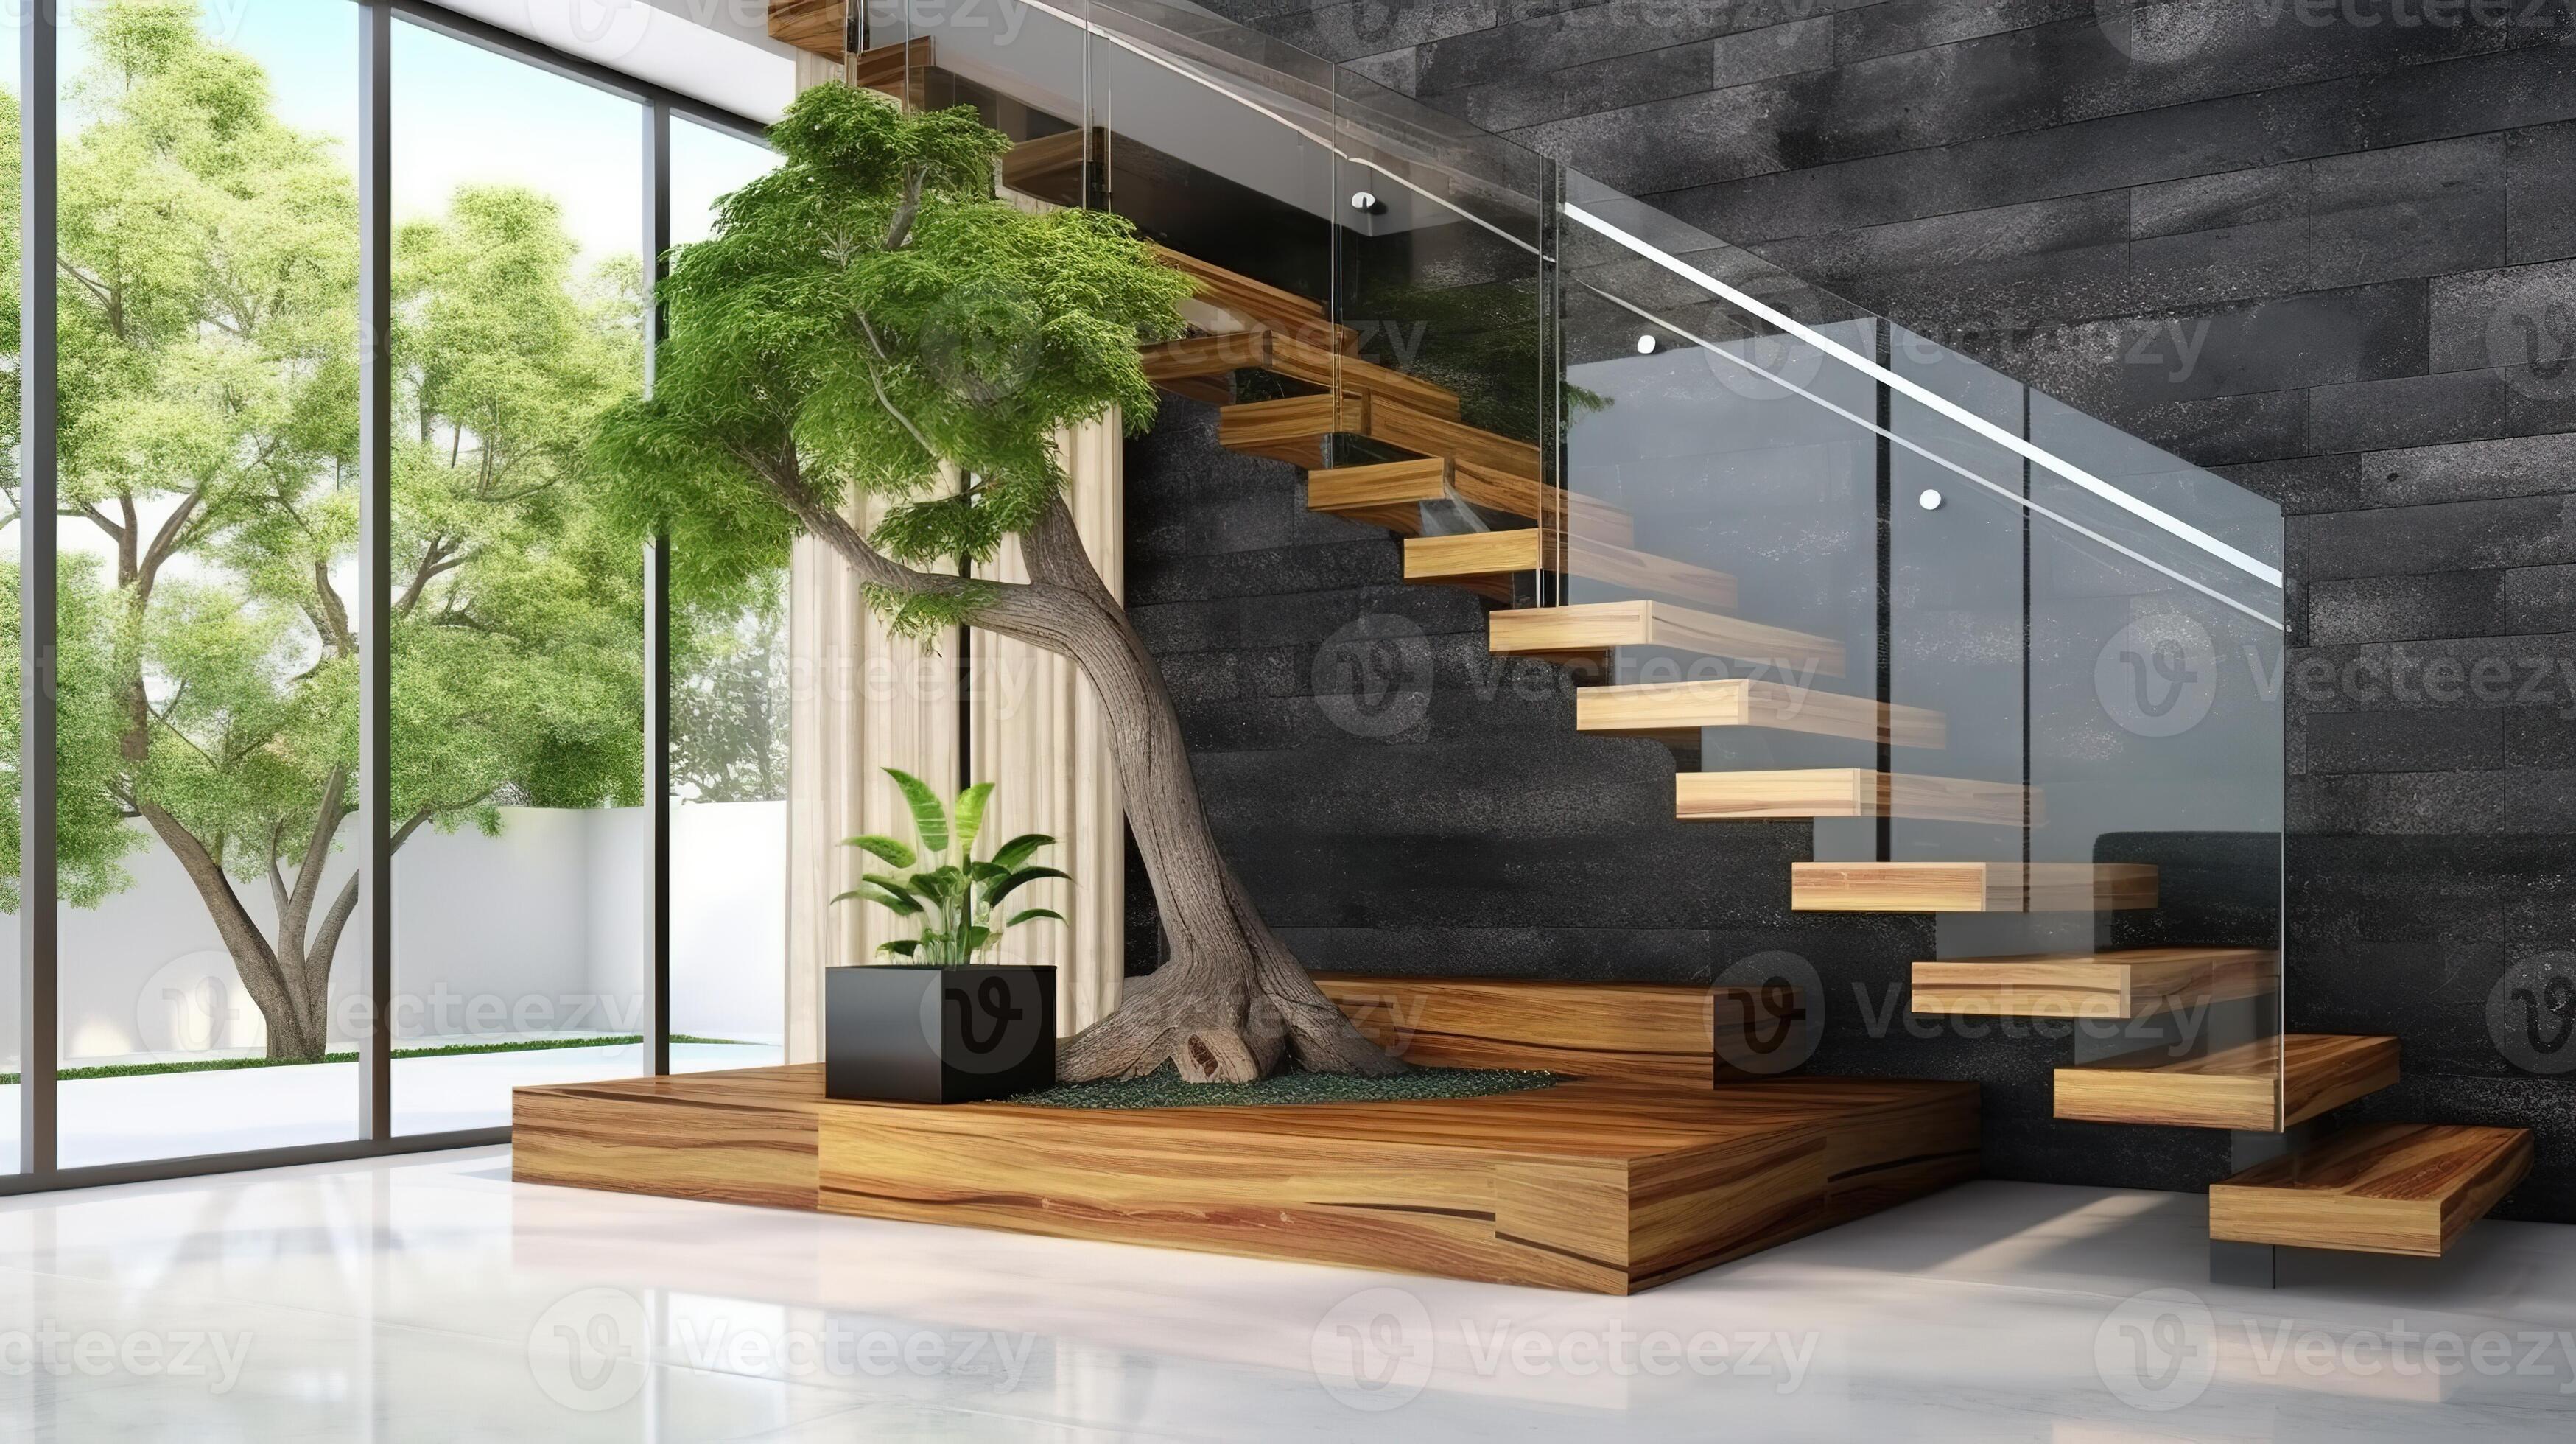 Modern staircase ideas and stairs design for home interiors